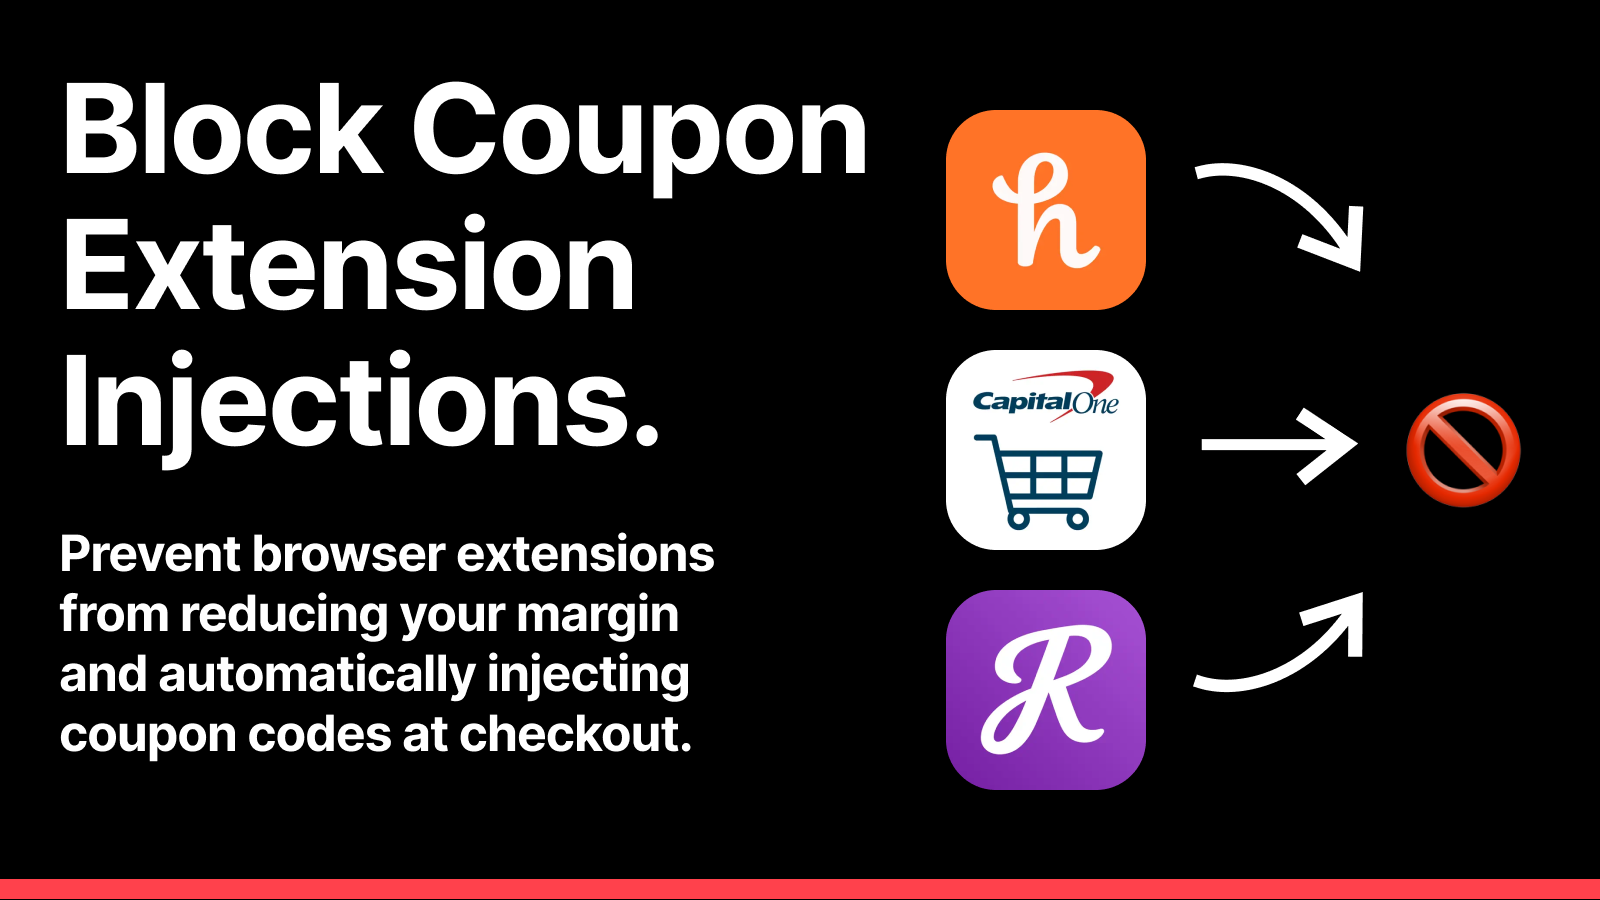 Block Coupon Extension Injections.